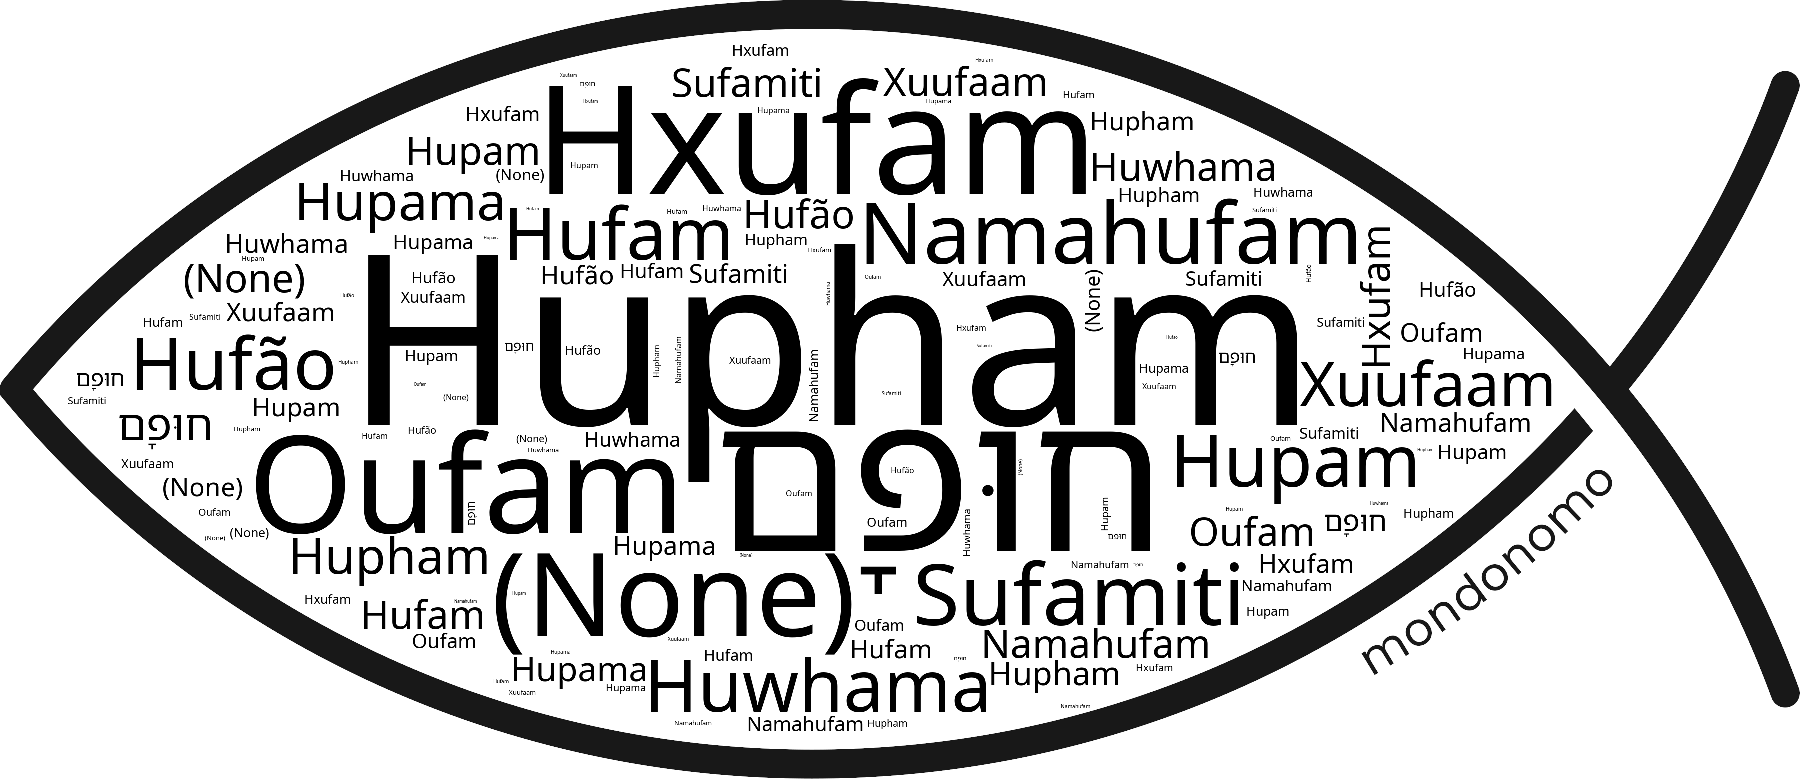 Name Hupham in the world's Bibles